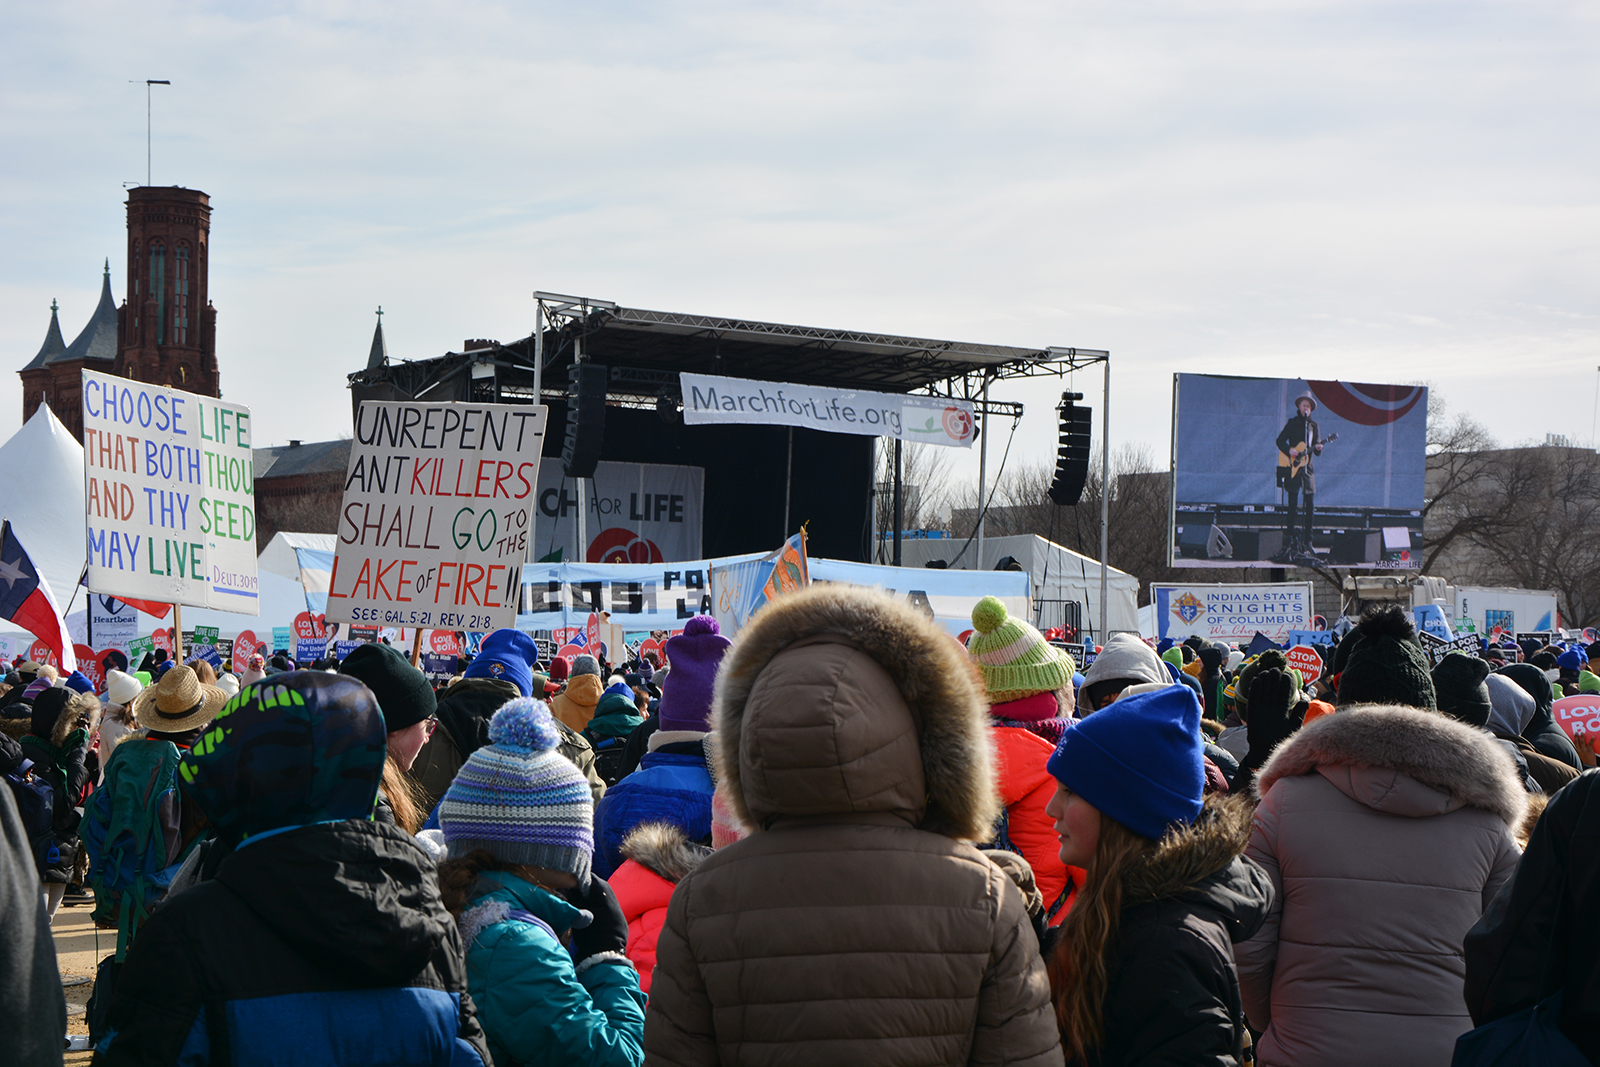 Scenes from the annual March for Life, Friday, Jan. 21, 2022, in Washington, D.C. RNS photo by Jack Jenkins